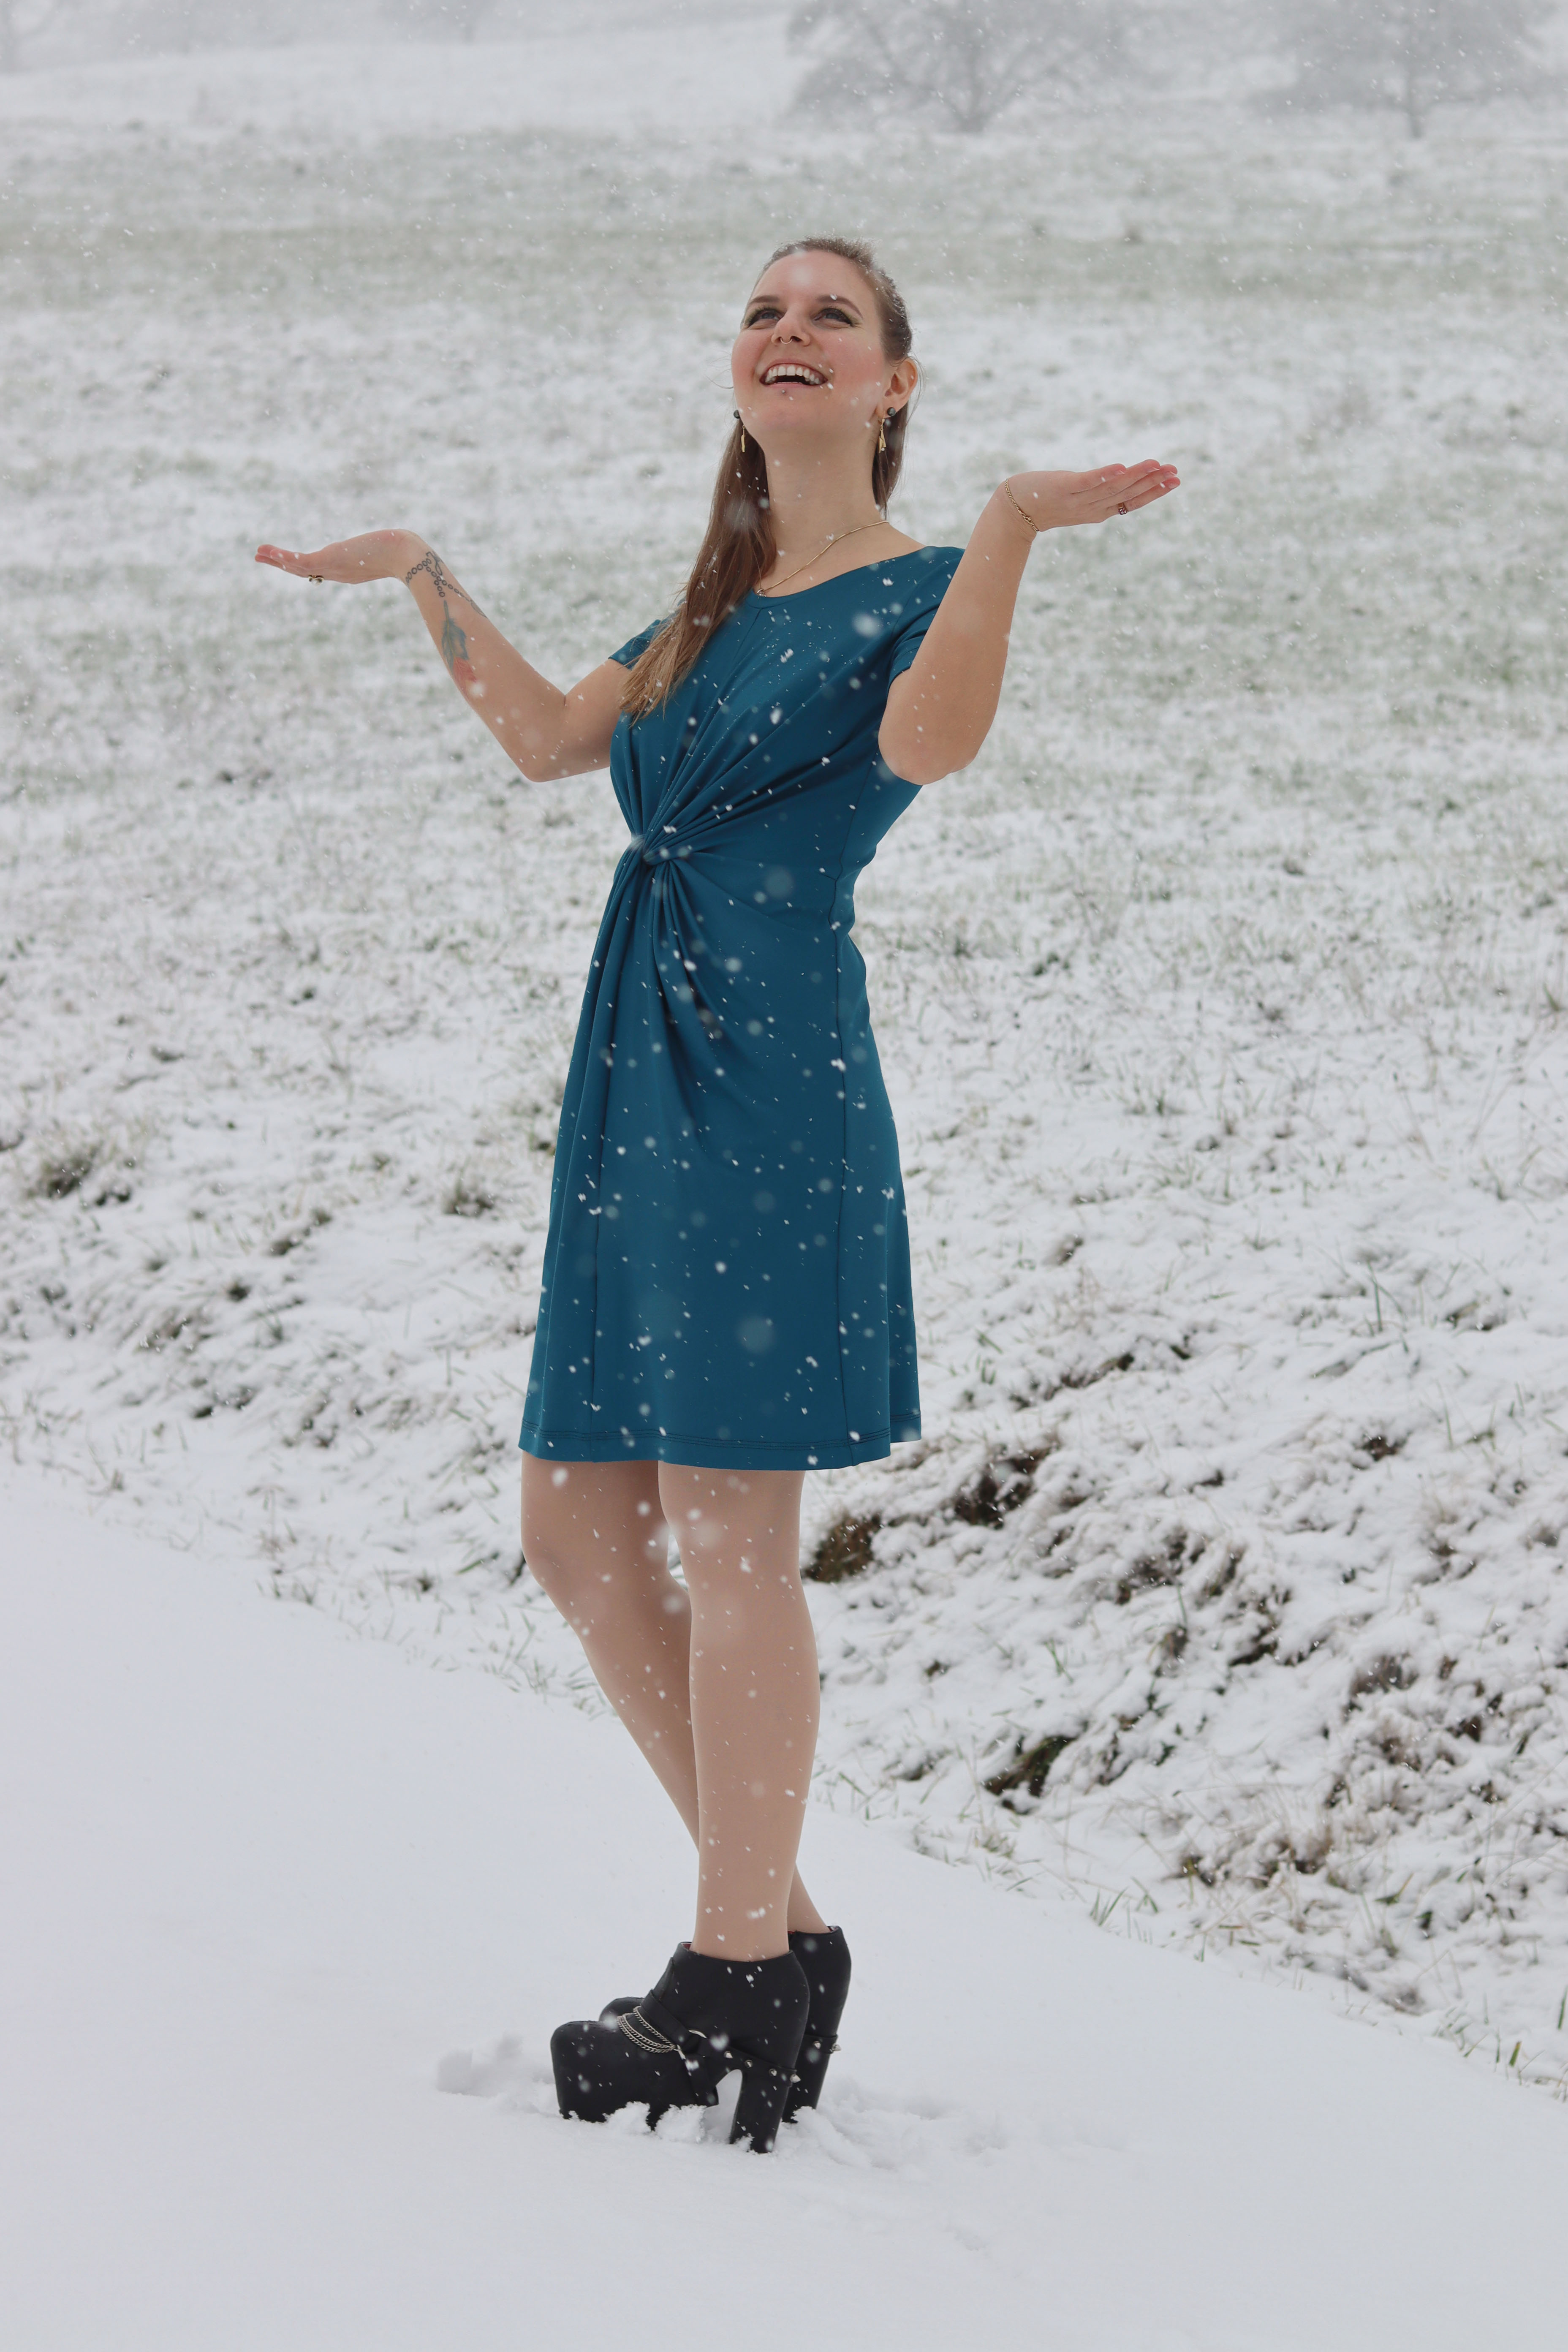 Summer dress in the snow - the Twisted Dress - Sewera Fashion